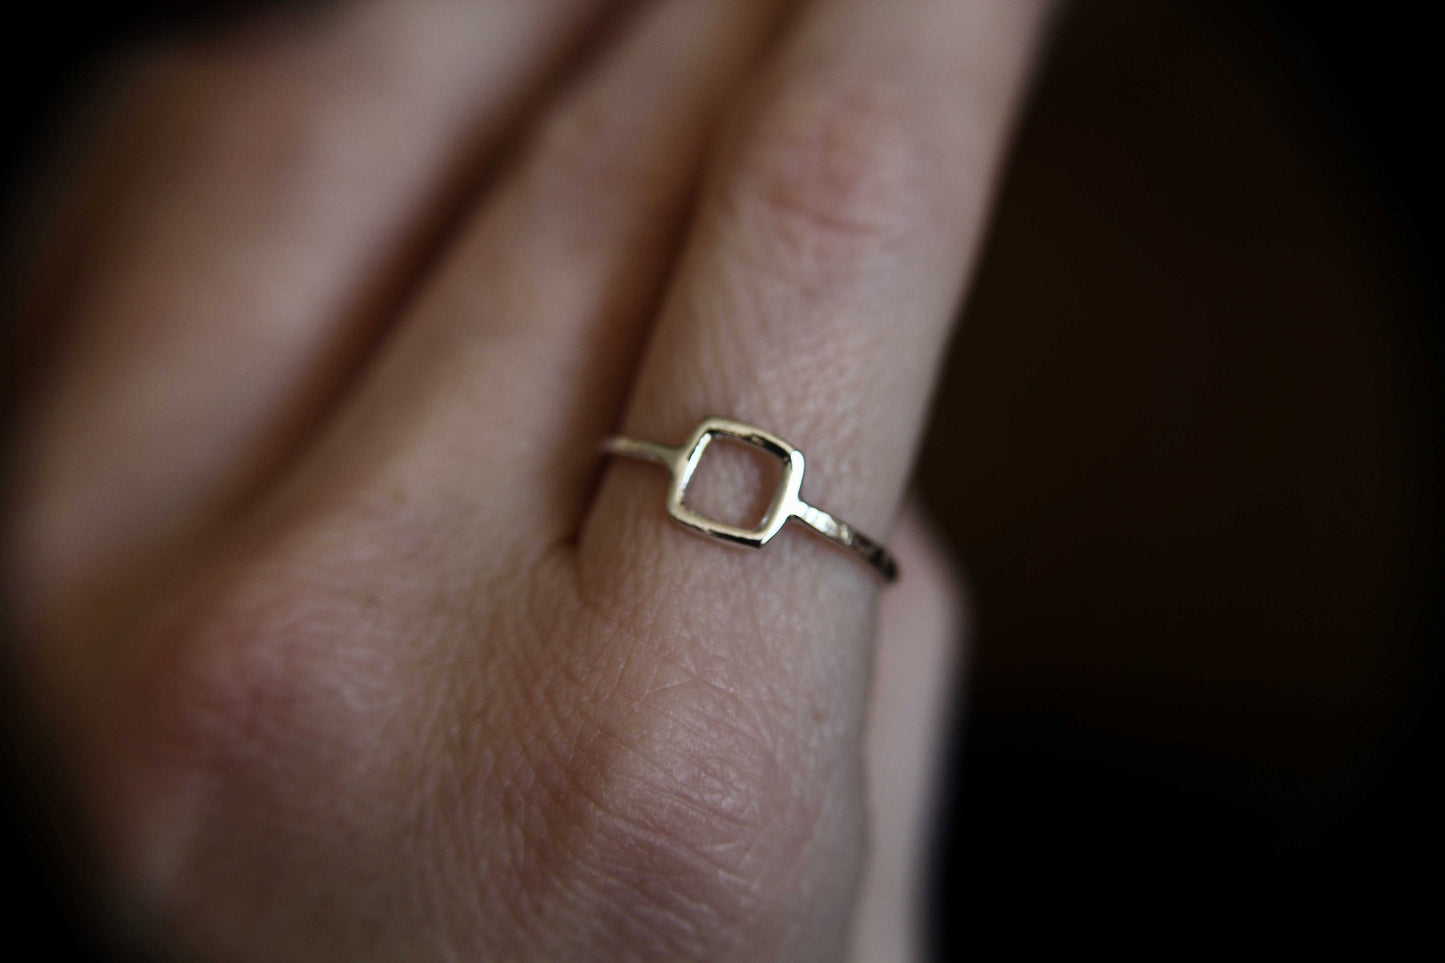 Square Ring, Stacking Rings, Modern Rings, Silver Geometric Rings,Simple Modern Rings, Open Square Ring, Minimalist Jewelry, Simple Ring